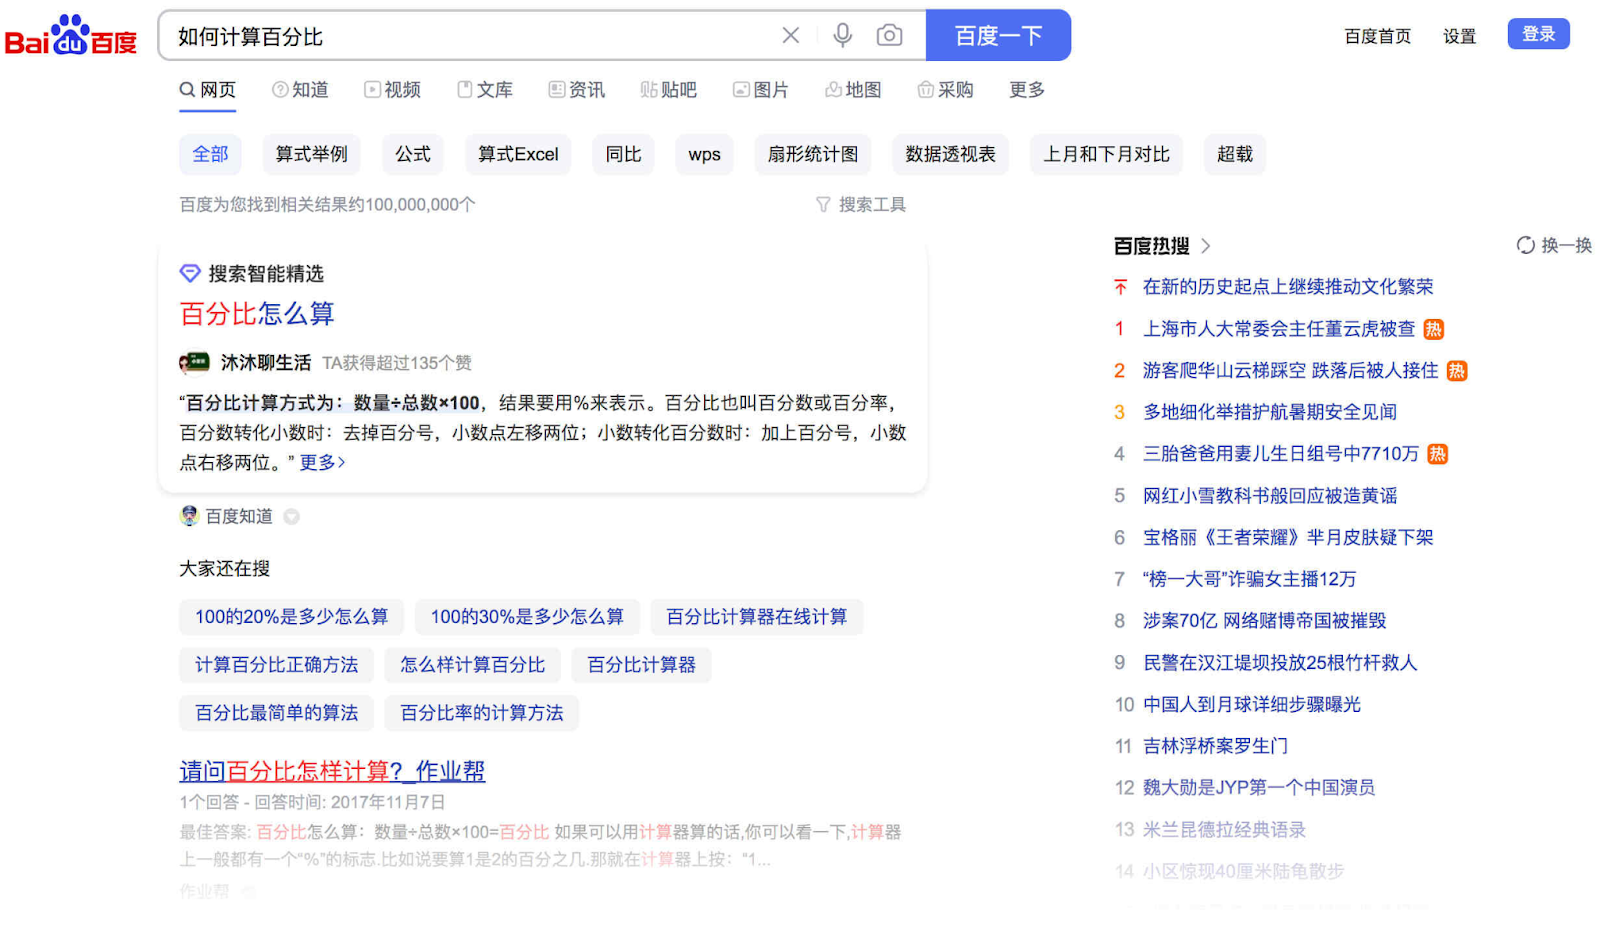 Baidu is China’s largest search engine